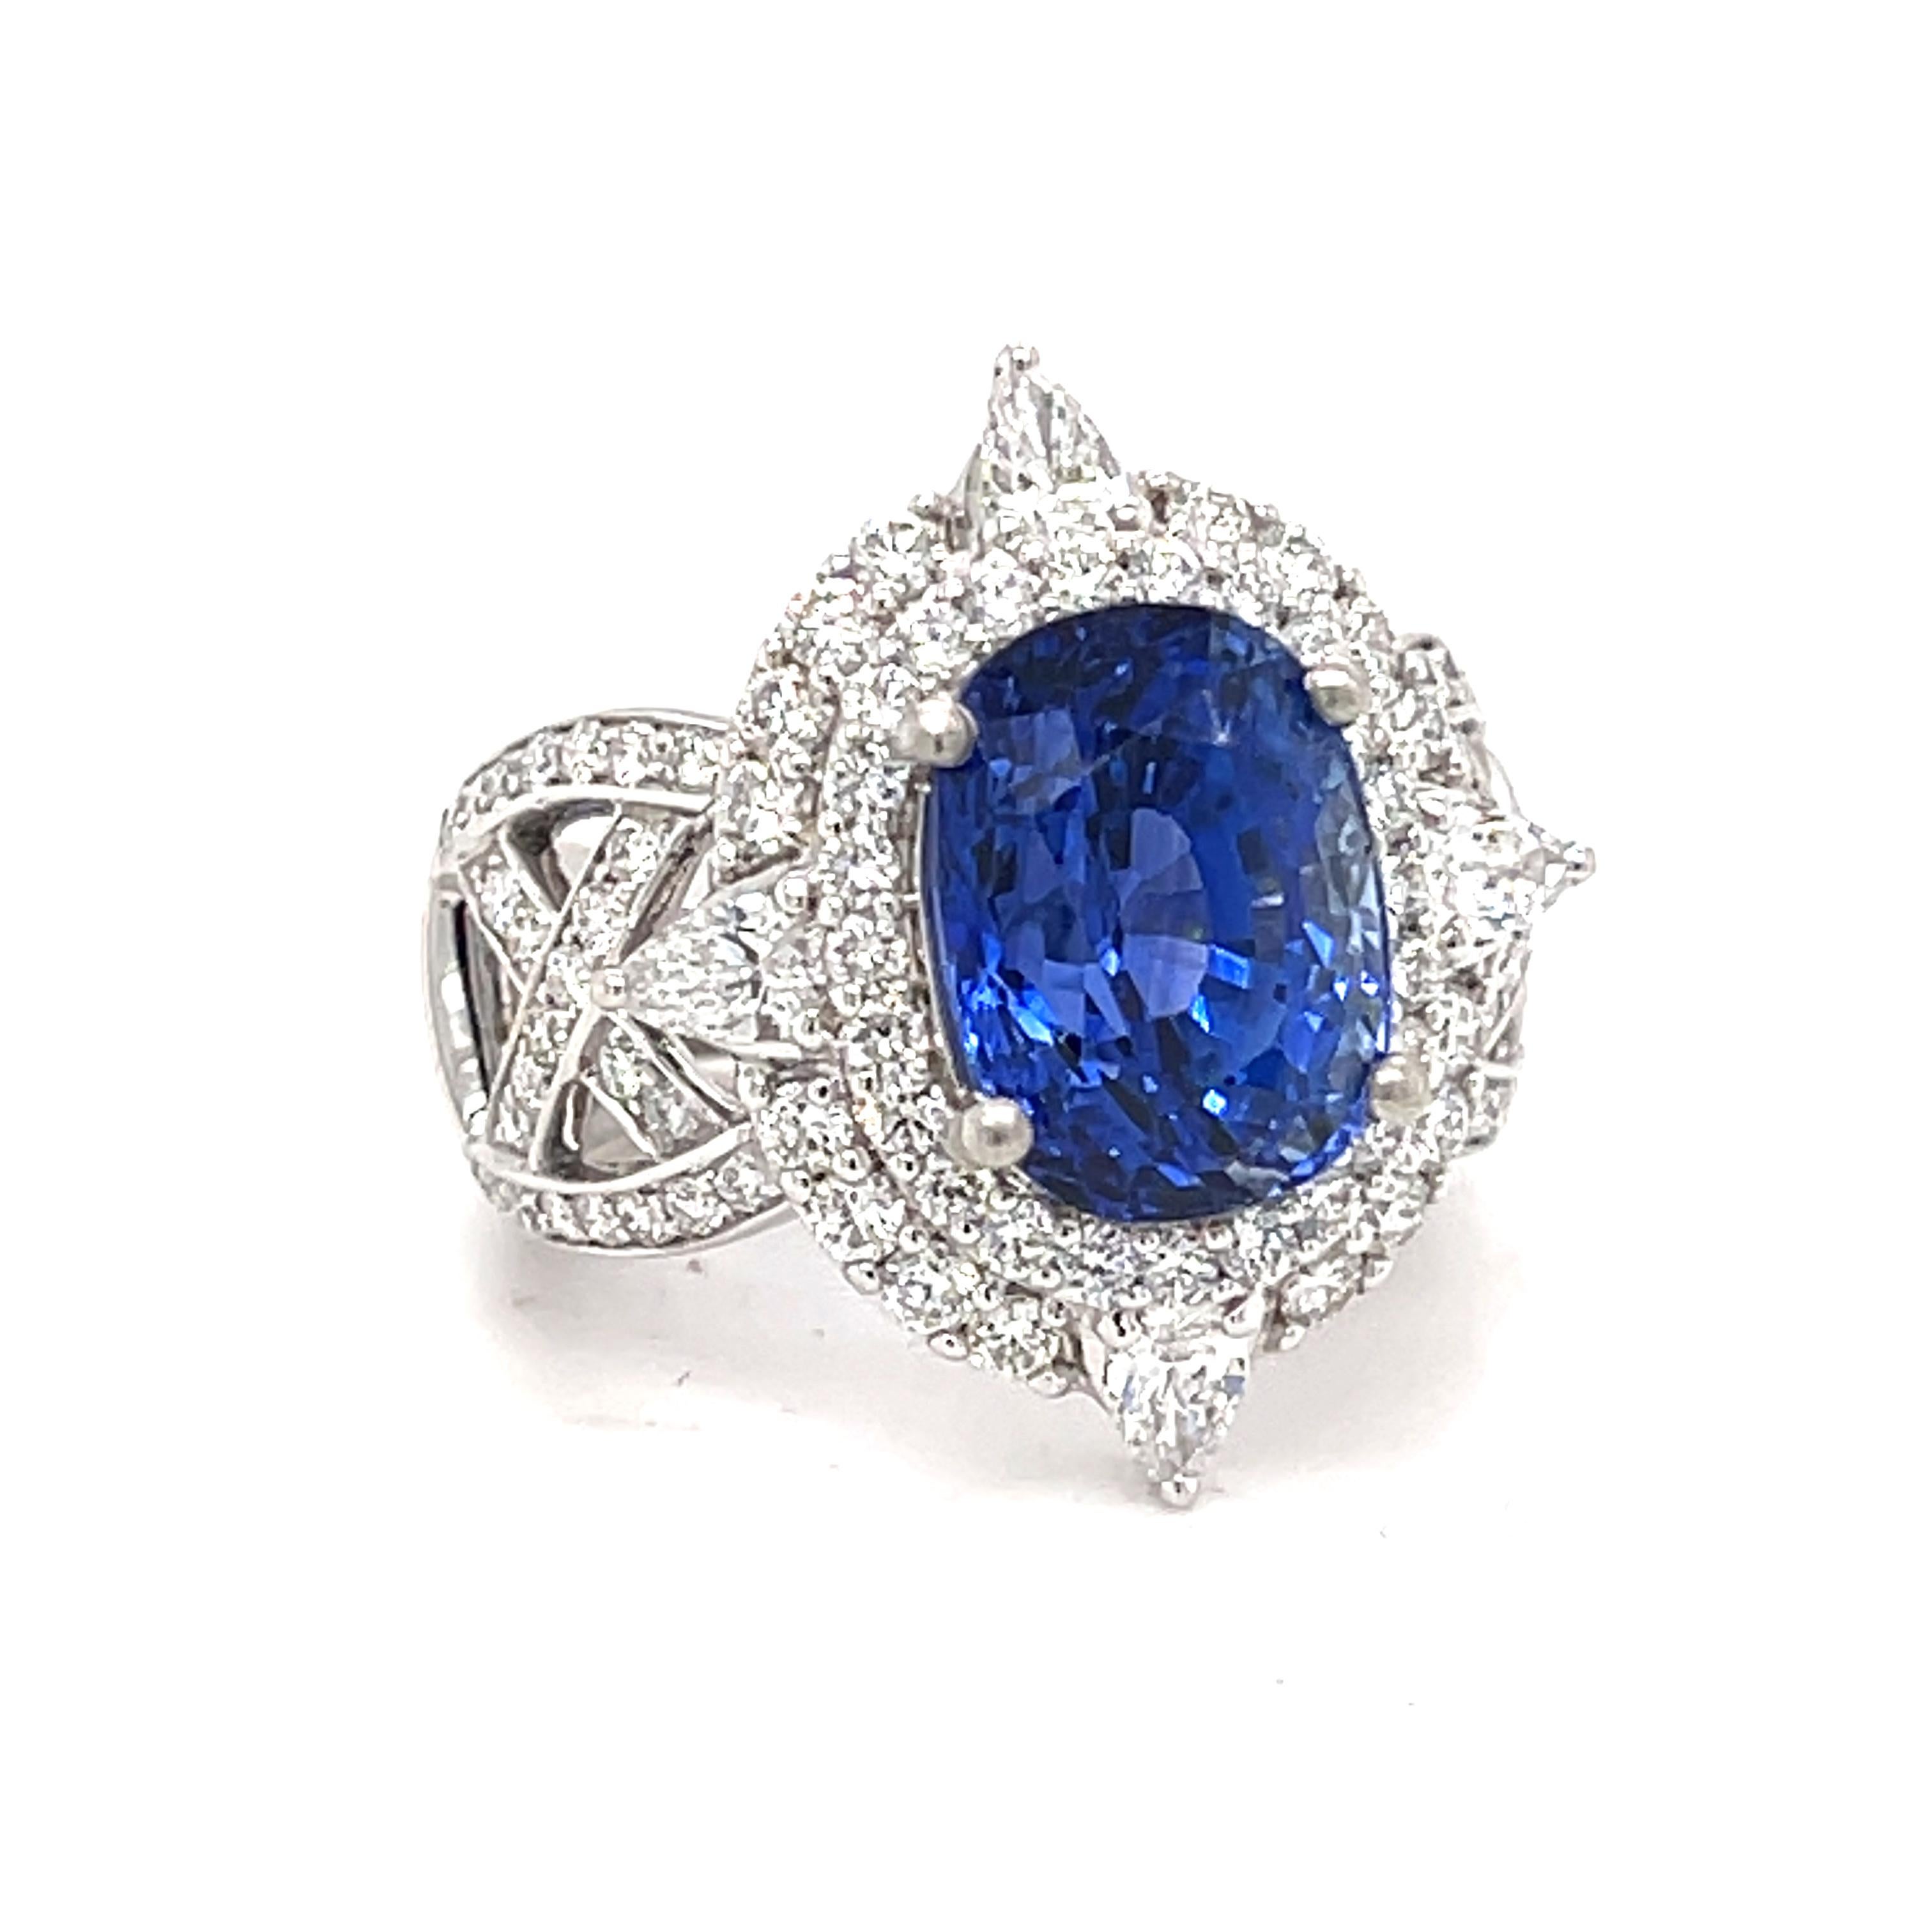 Danuta Regal Platinum Engagement one of the kind ring set with 7.5 carat oval cornflower blue color  sapphire stunning  one of the kind design and surrounded with 2.80 carat brilliant cut diamonds FG color VVS1 clarity. This assessment of color and